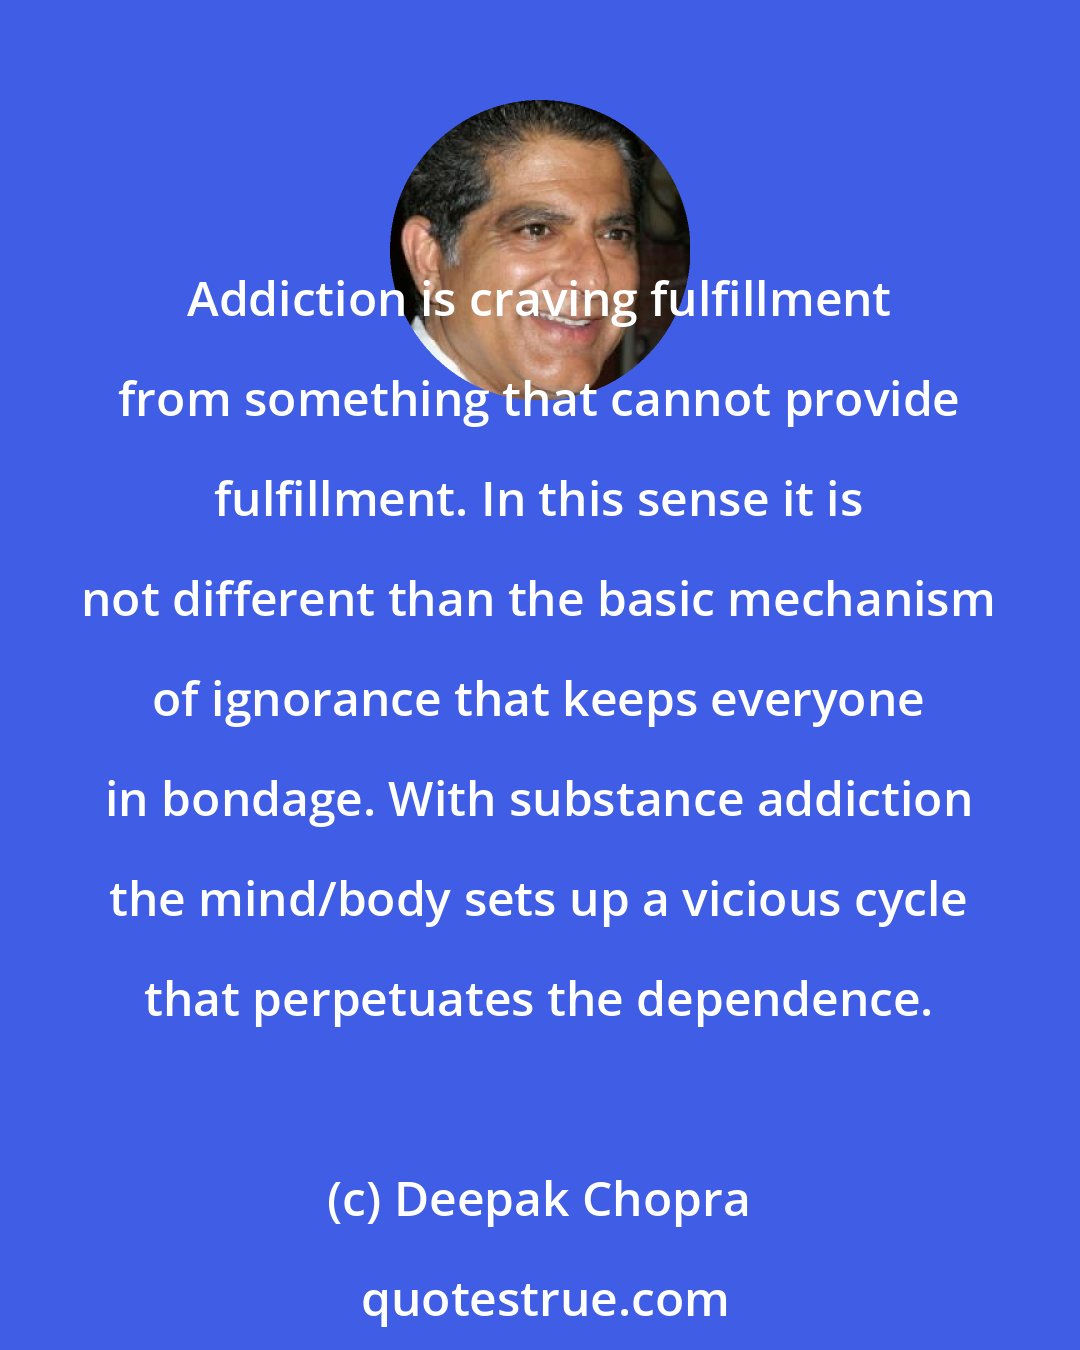 Deepak Chopra: Addiction is craving fulfillment from something that cannot provide fulfillment. In this sense it is not different than the basic mechanism of ignorance that keeps everyone in bondage. With substance addiction the mind/body sets up a vicious cycle that perpetuates the dependence.